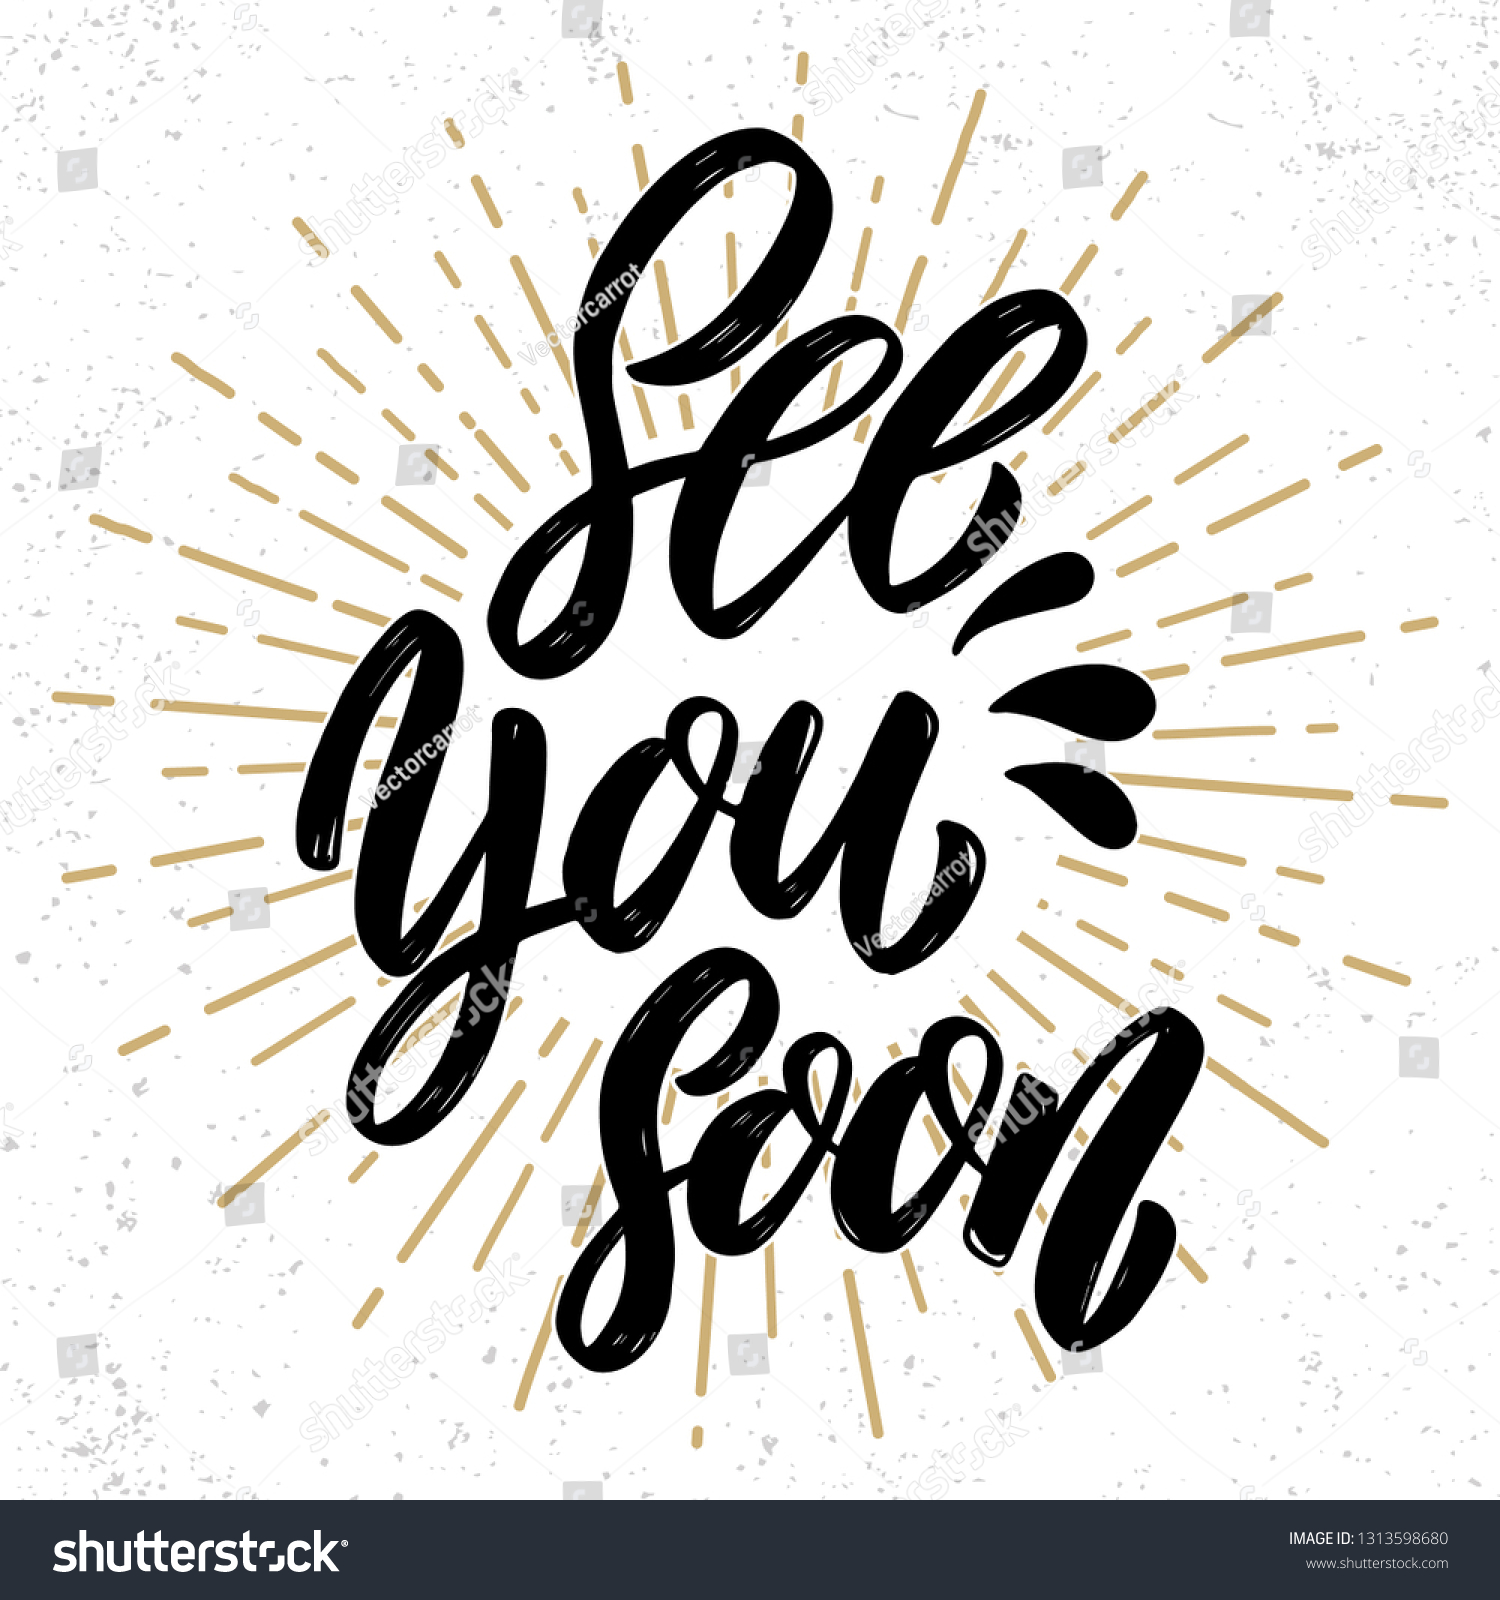 SVG of See you soon. Hand drawn lettering phrase. Design element for poster, greeting card, banner. Vector illustration svg